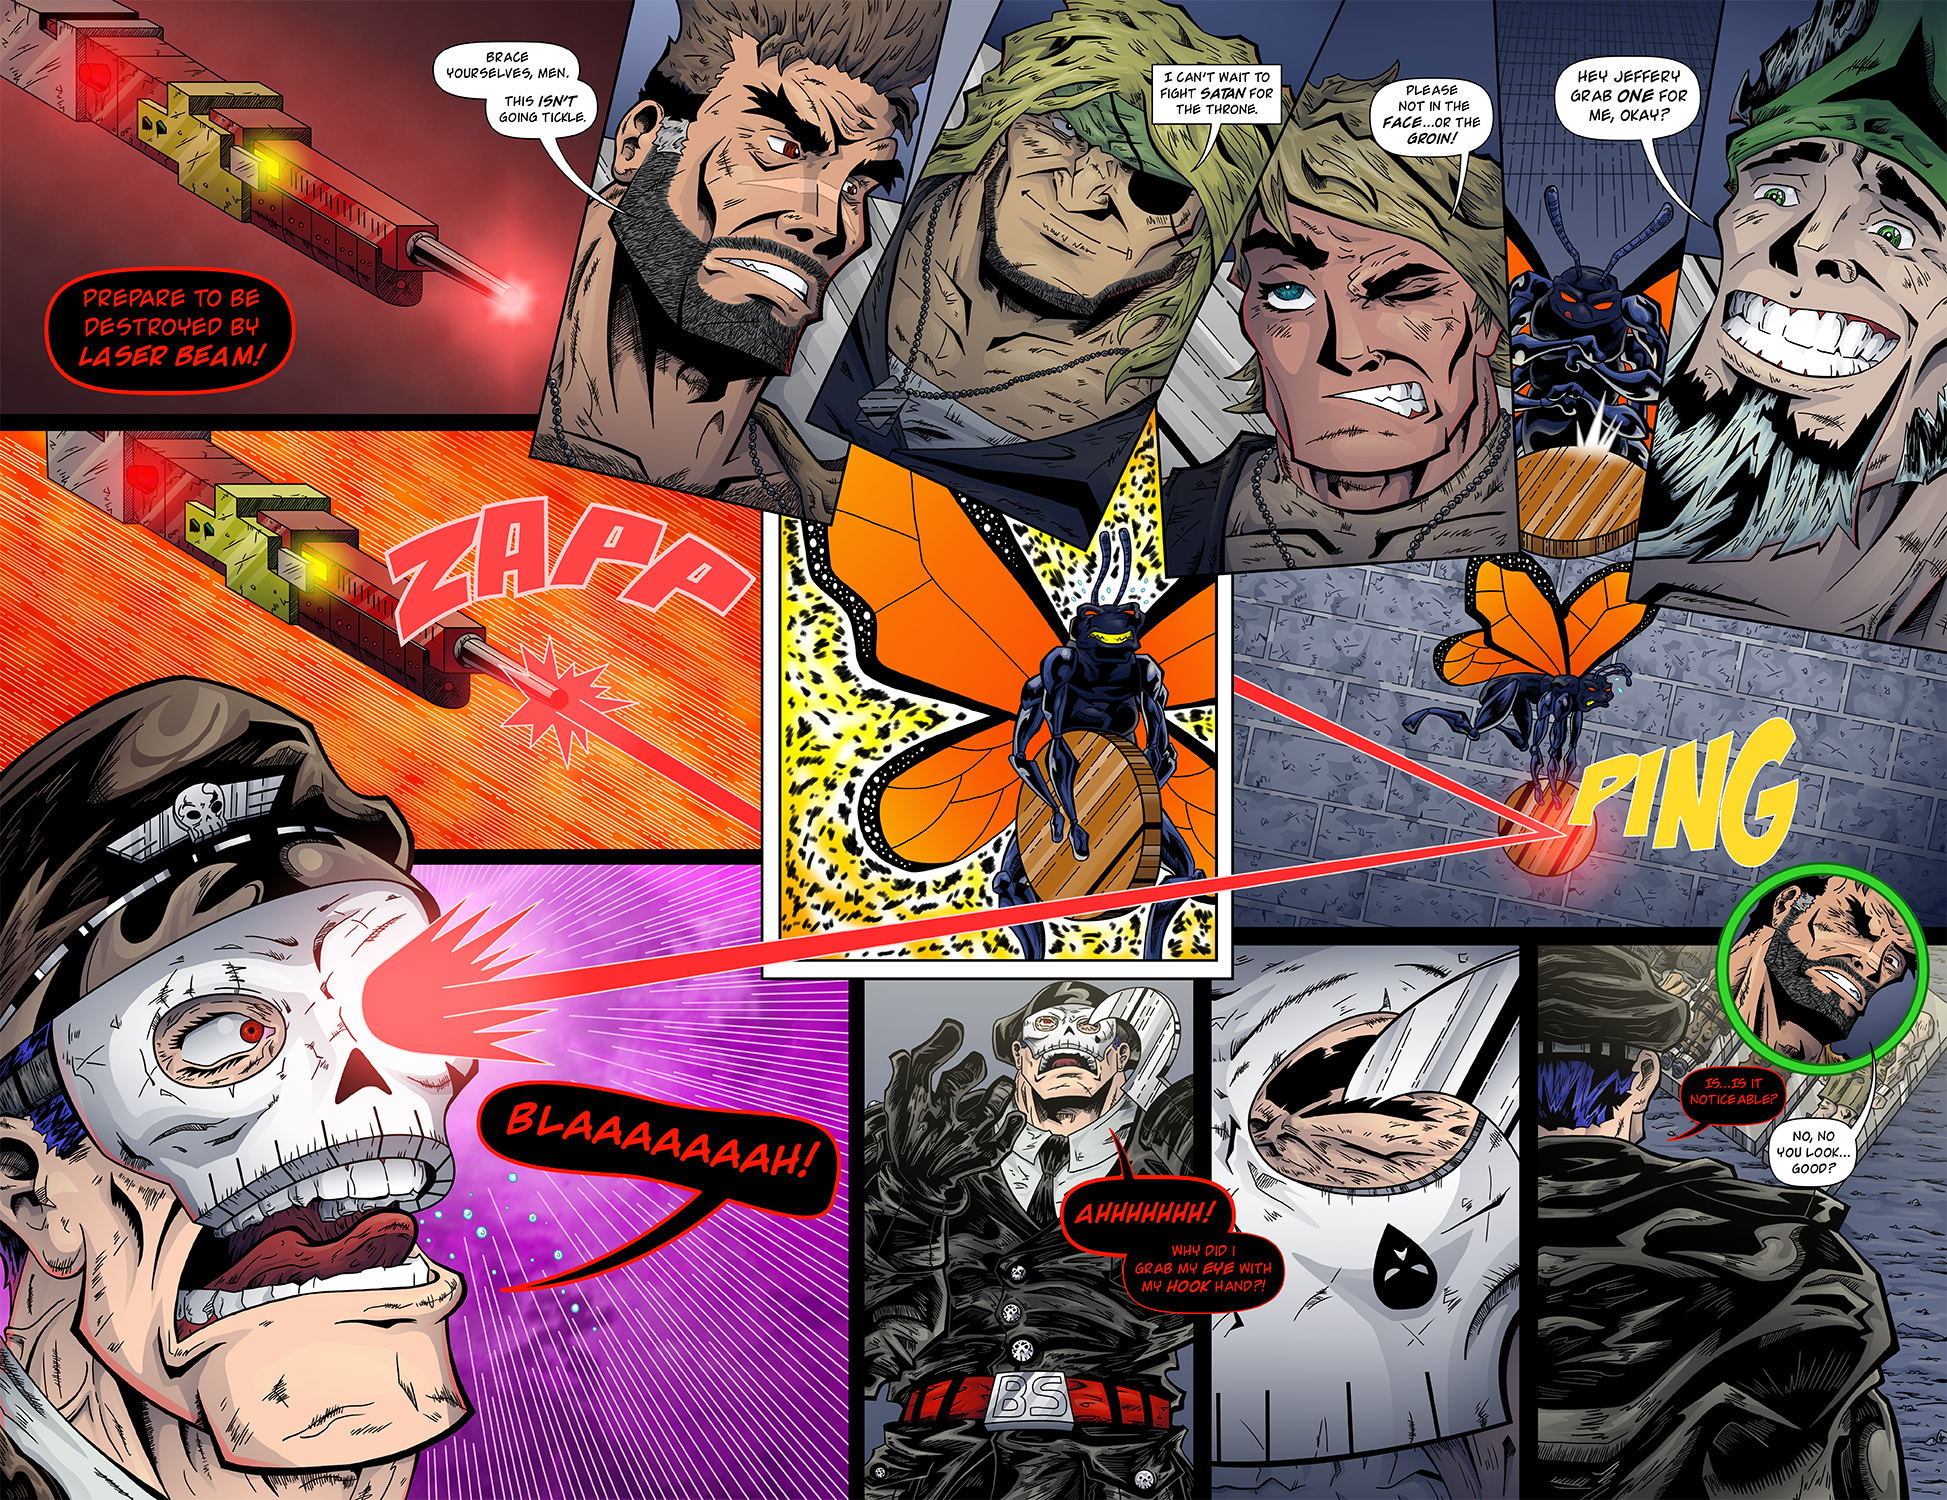 MISSION 011: PAGES 18-19 “ISN’T GOING TO TICKLE”